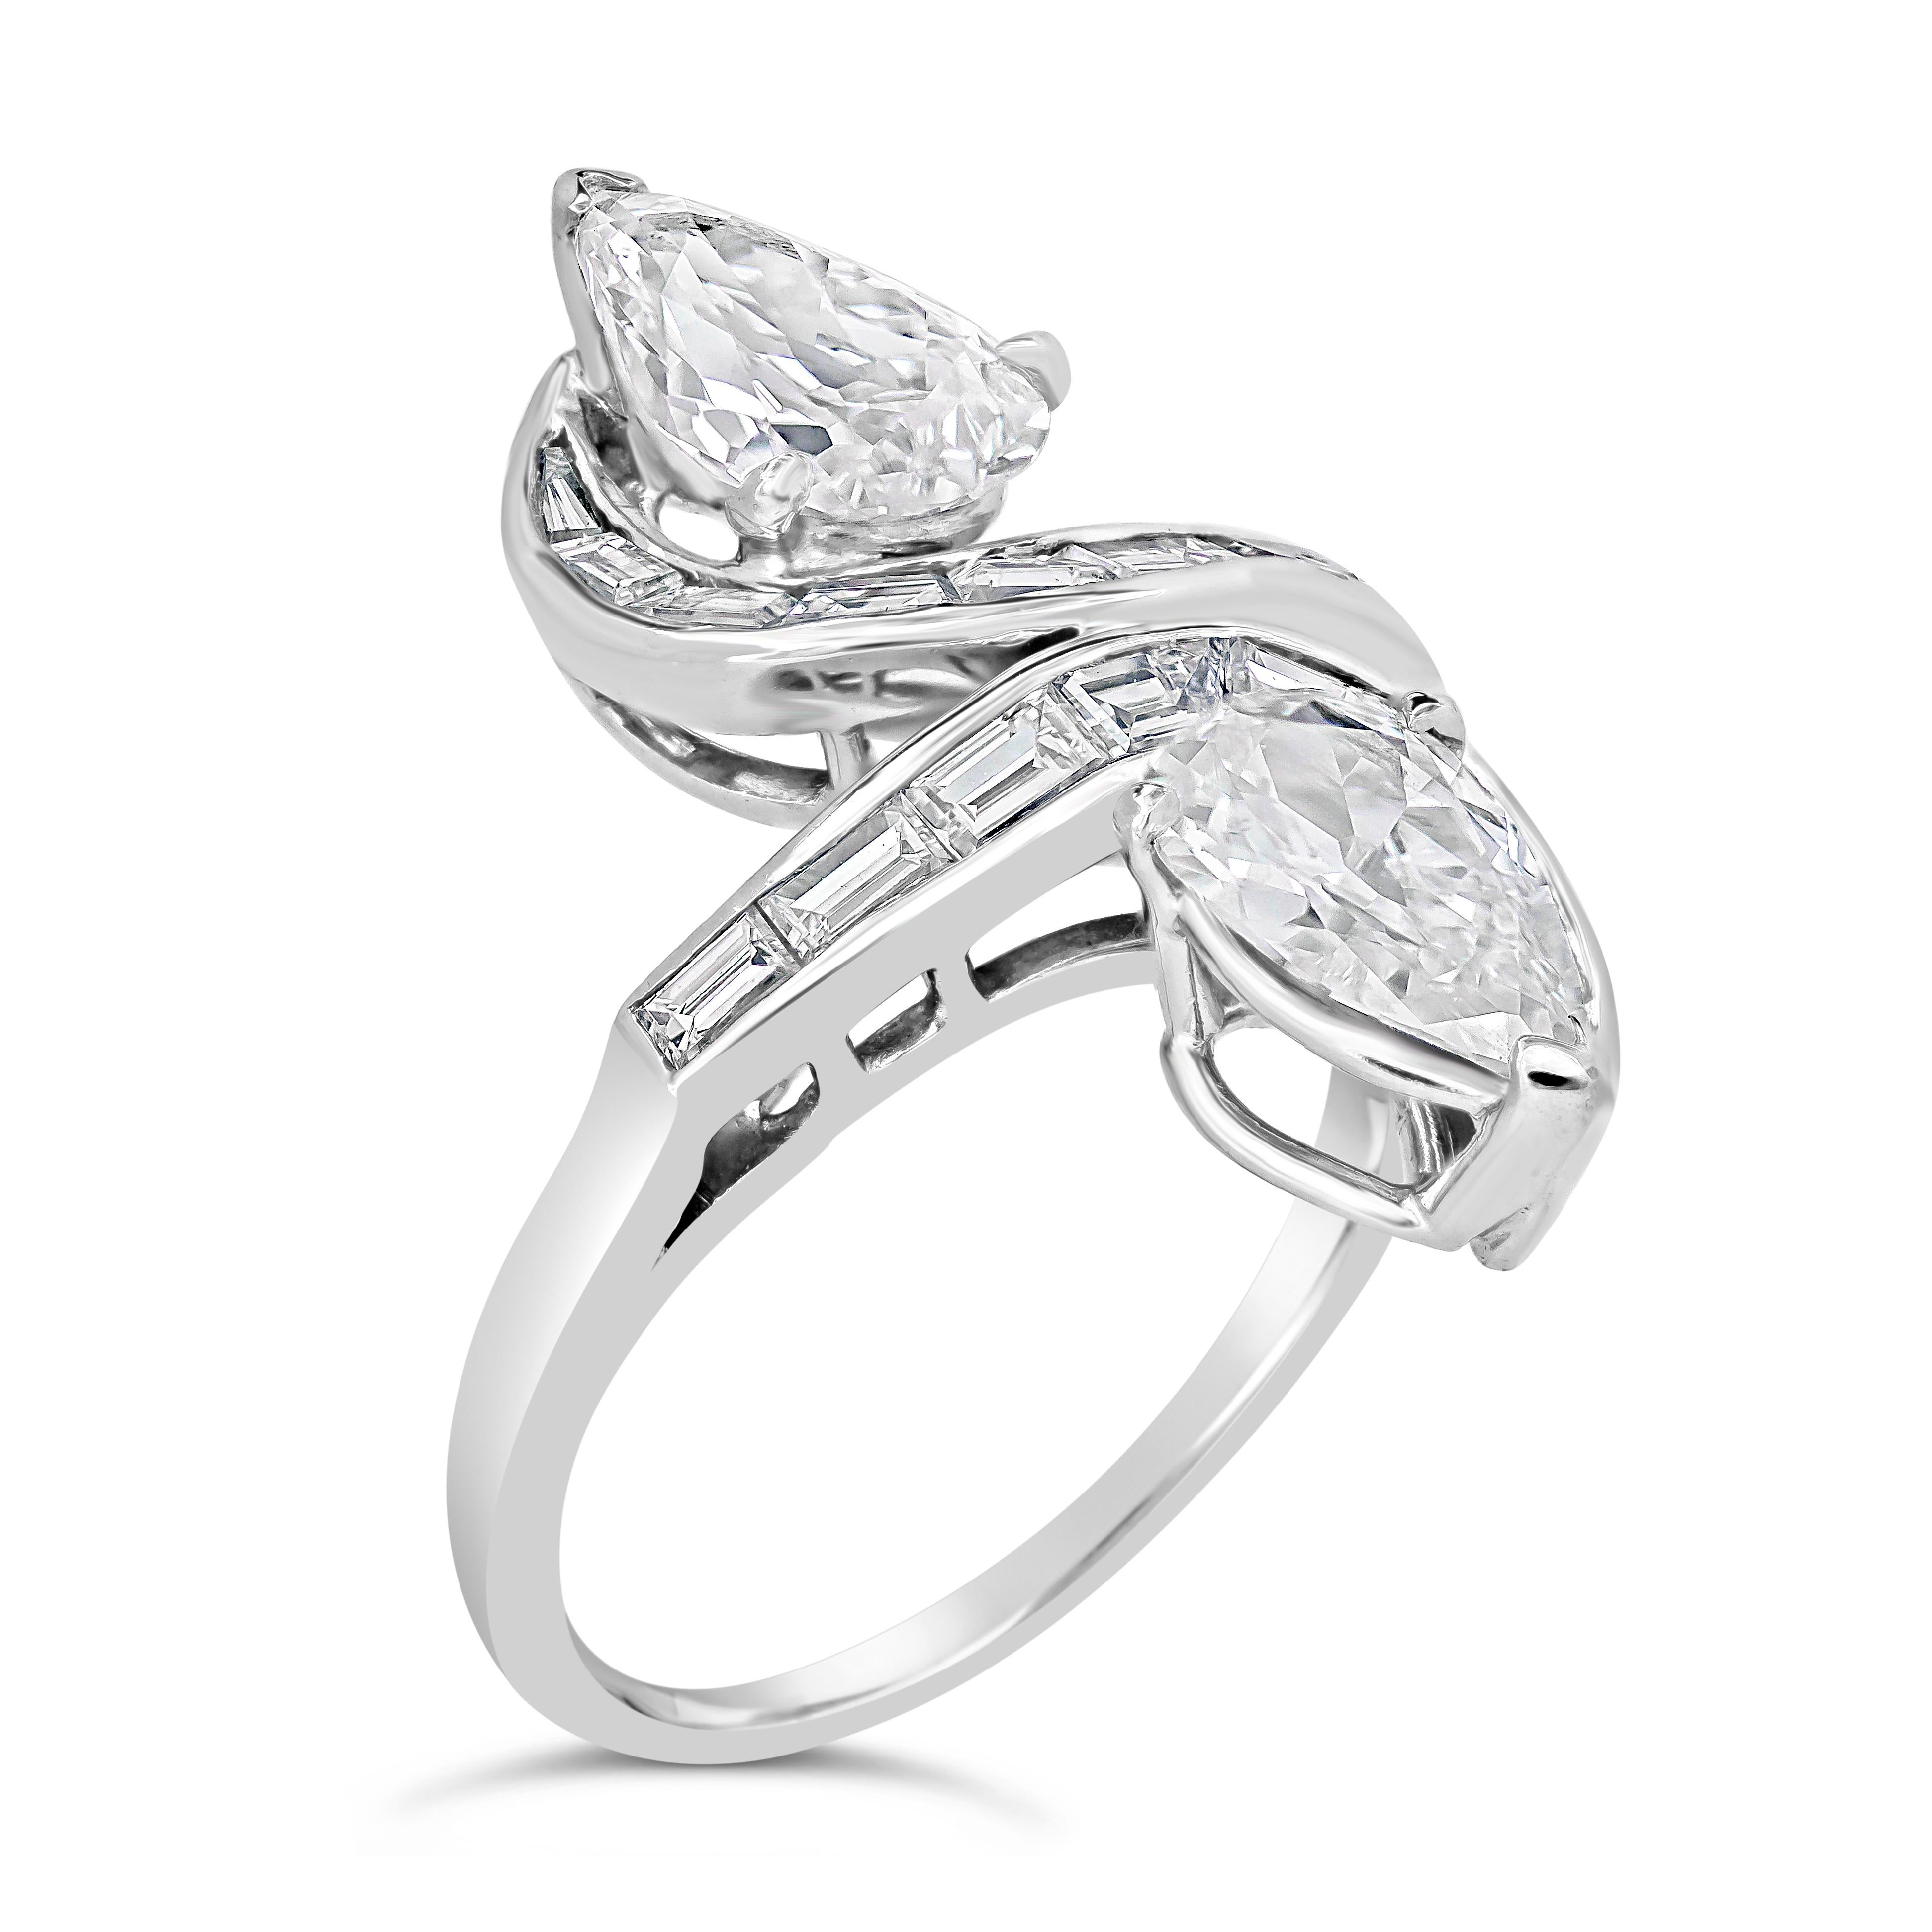 This beautiful antique cocktail ring features 2 pear shape diamonds weighing 2.48 carats total, certified by GIA as F-D Color and VS2 in Clarity. Accented by baguette cut diamonds in channel set weighing 0.90 carat total. Finely made in platinum.